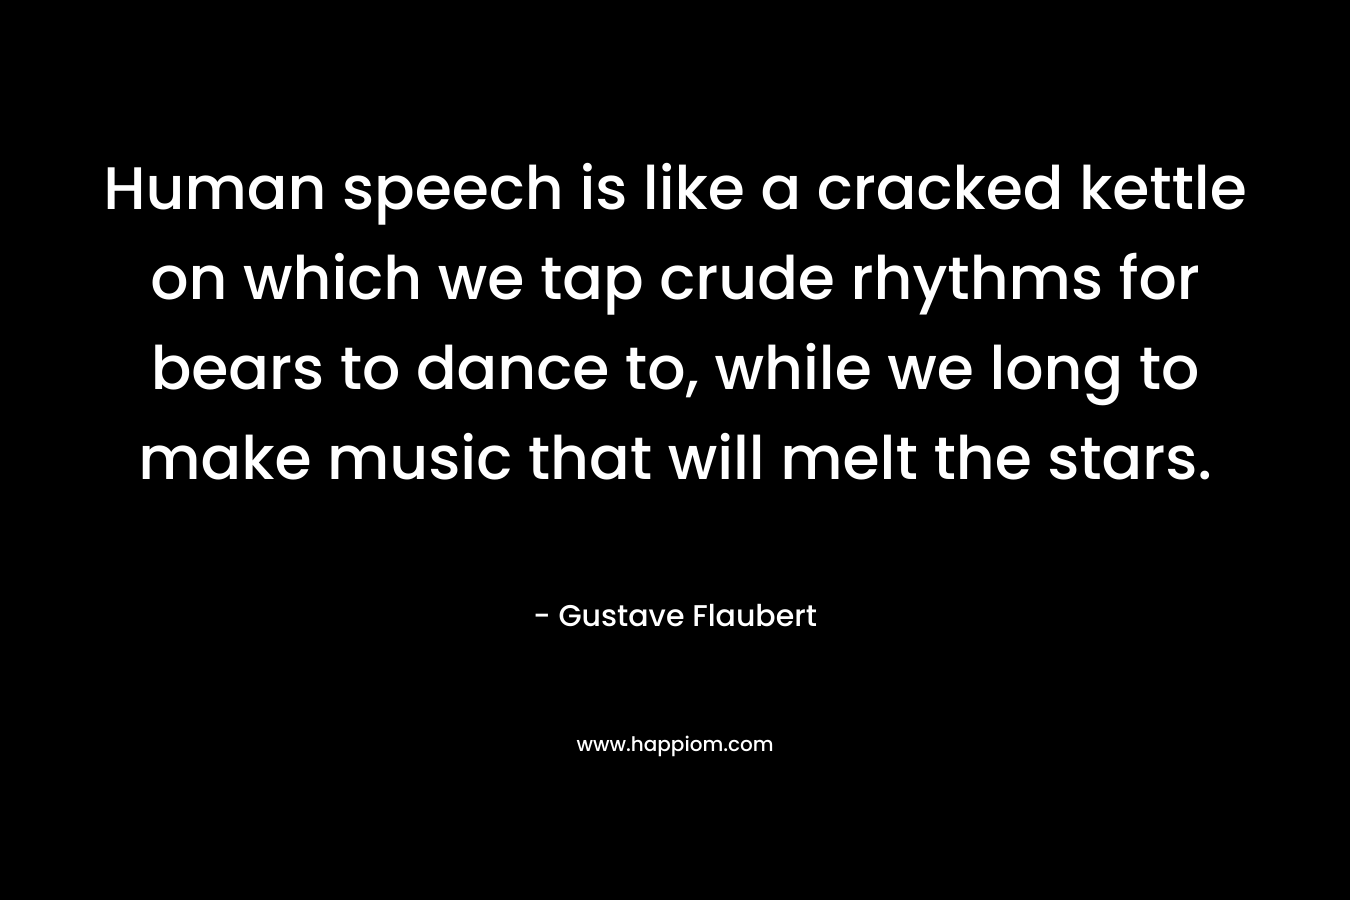 Human speech is like a cracked kettle on which we tap crude rhythms for bears to dance to, while we long to make music that will melt the stars.